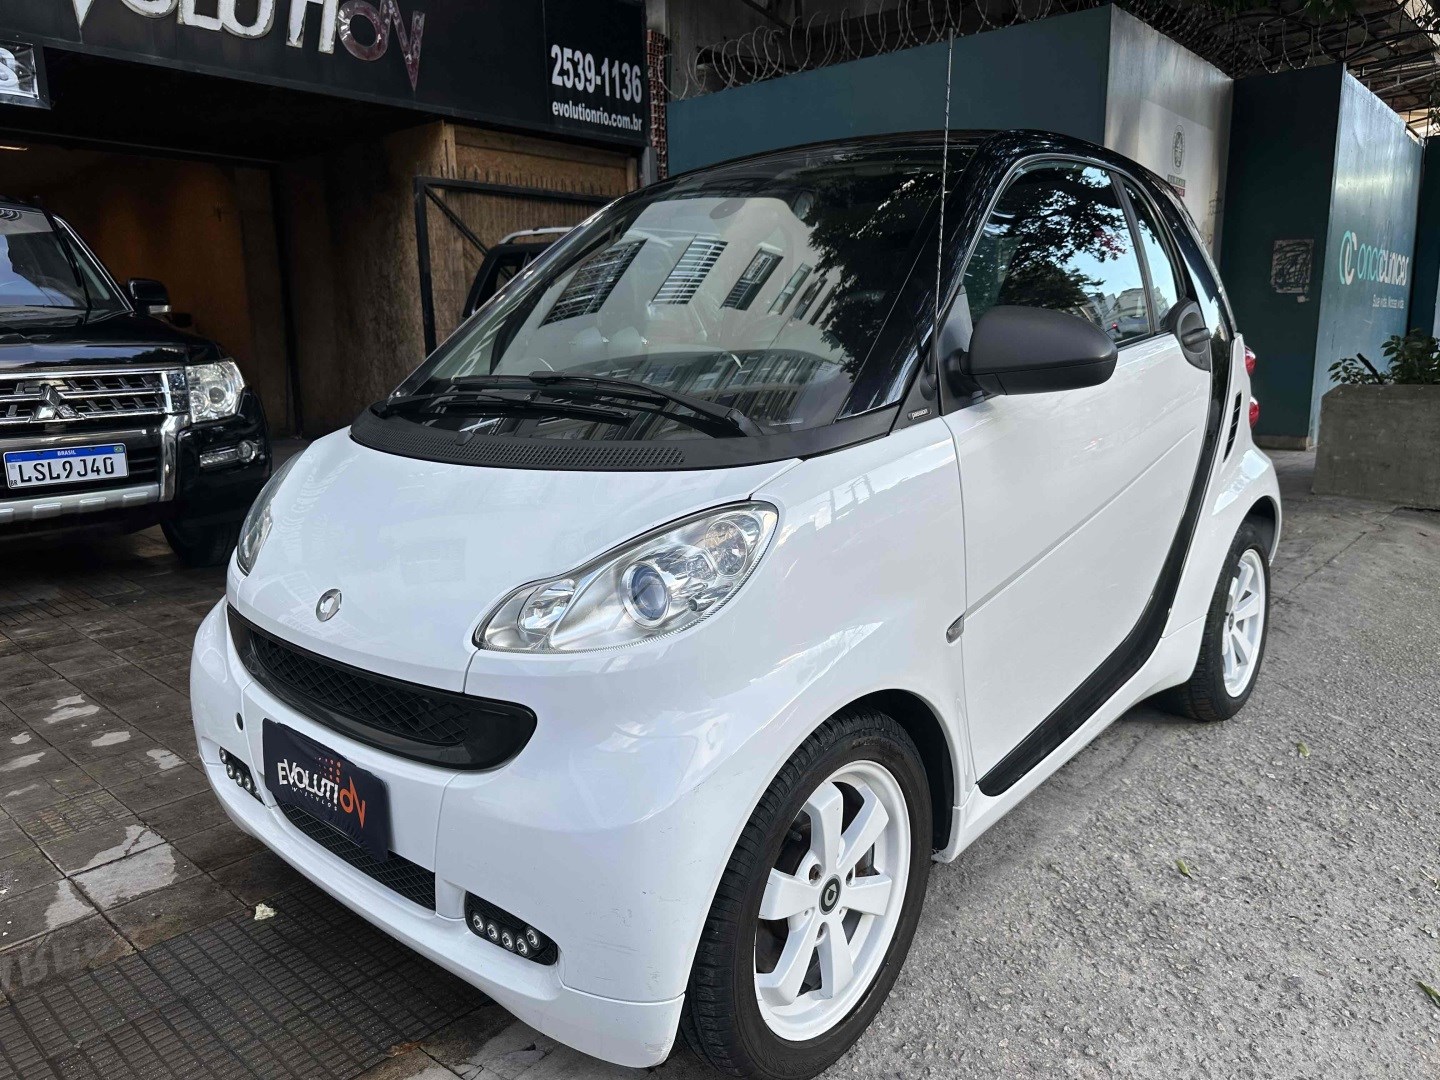 SMART FORTWO 1.0 COUPE 3 CILINDROS TURBO GASOLINA 2P AUTOMÁTICO